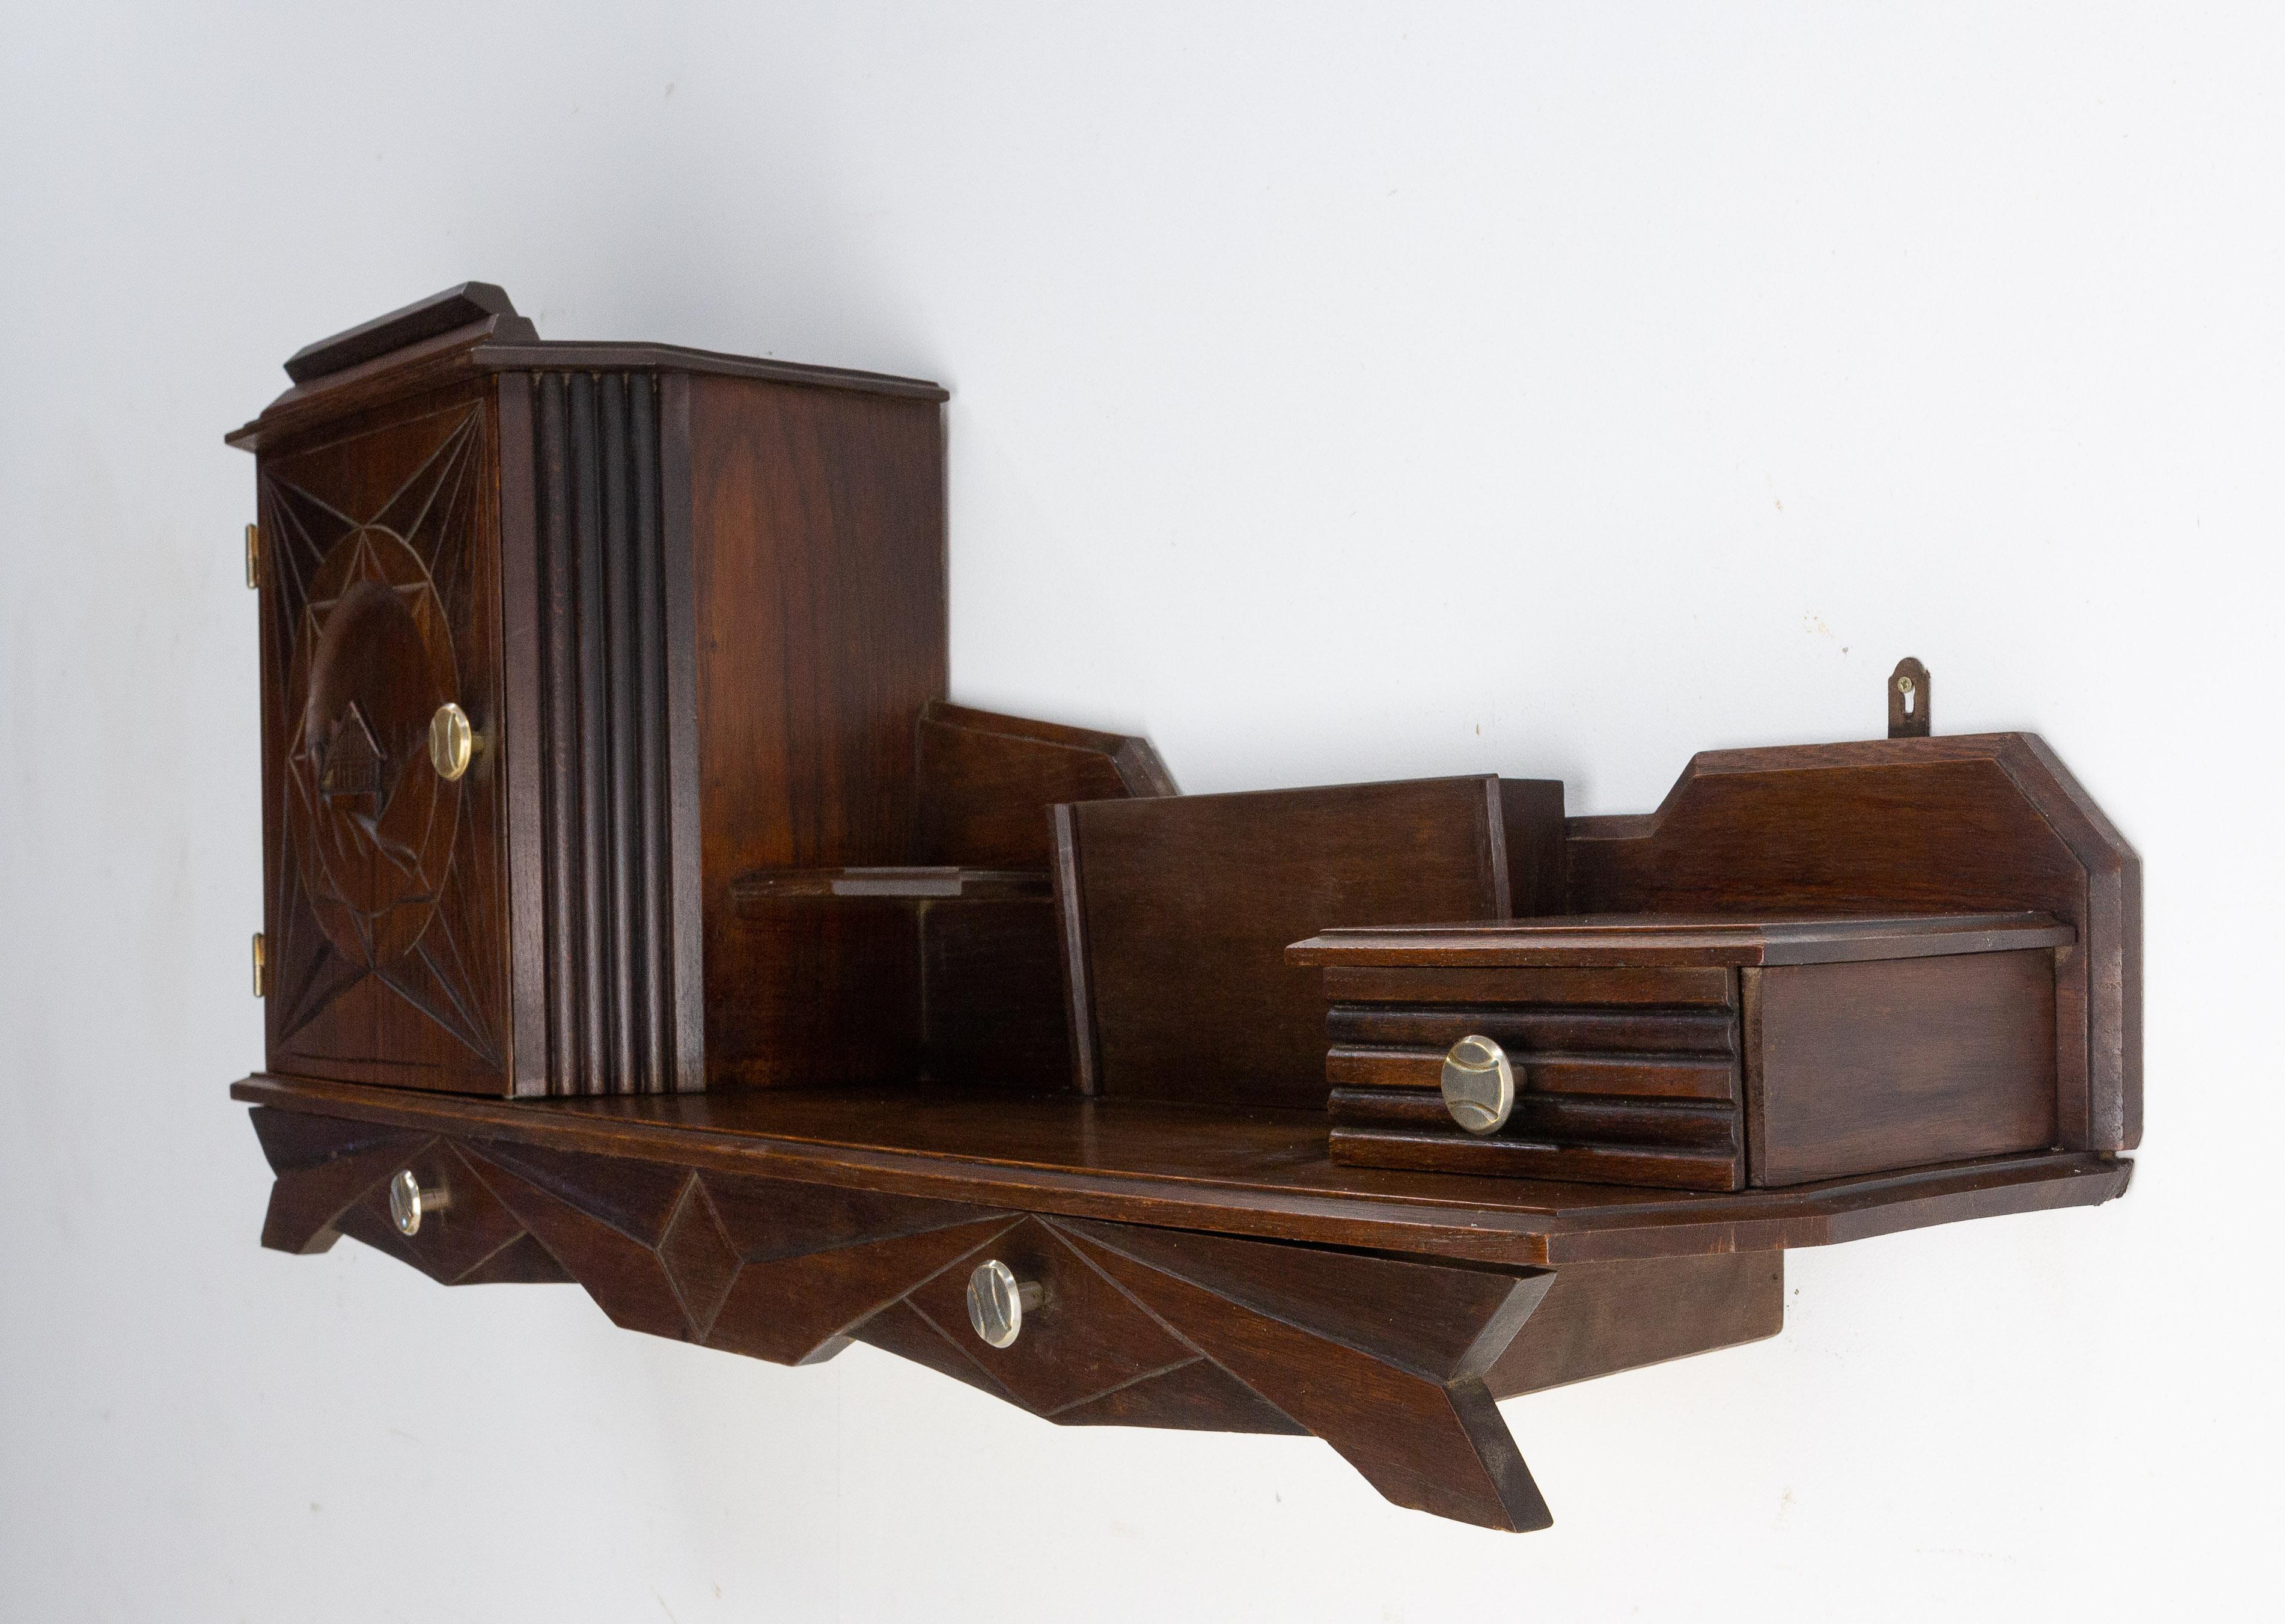 Mid-20th Century Art Deco Entry Shelf with Cabinet and Drawers Swiss Alp Style, French, 1930 For Sale